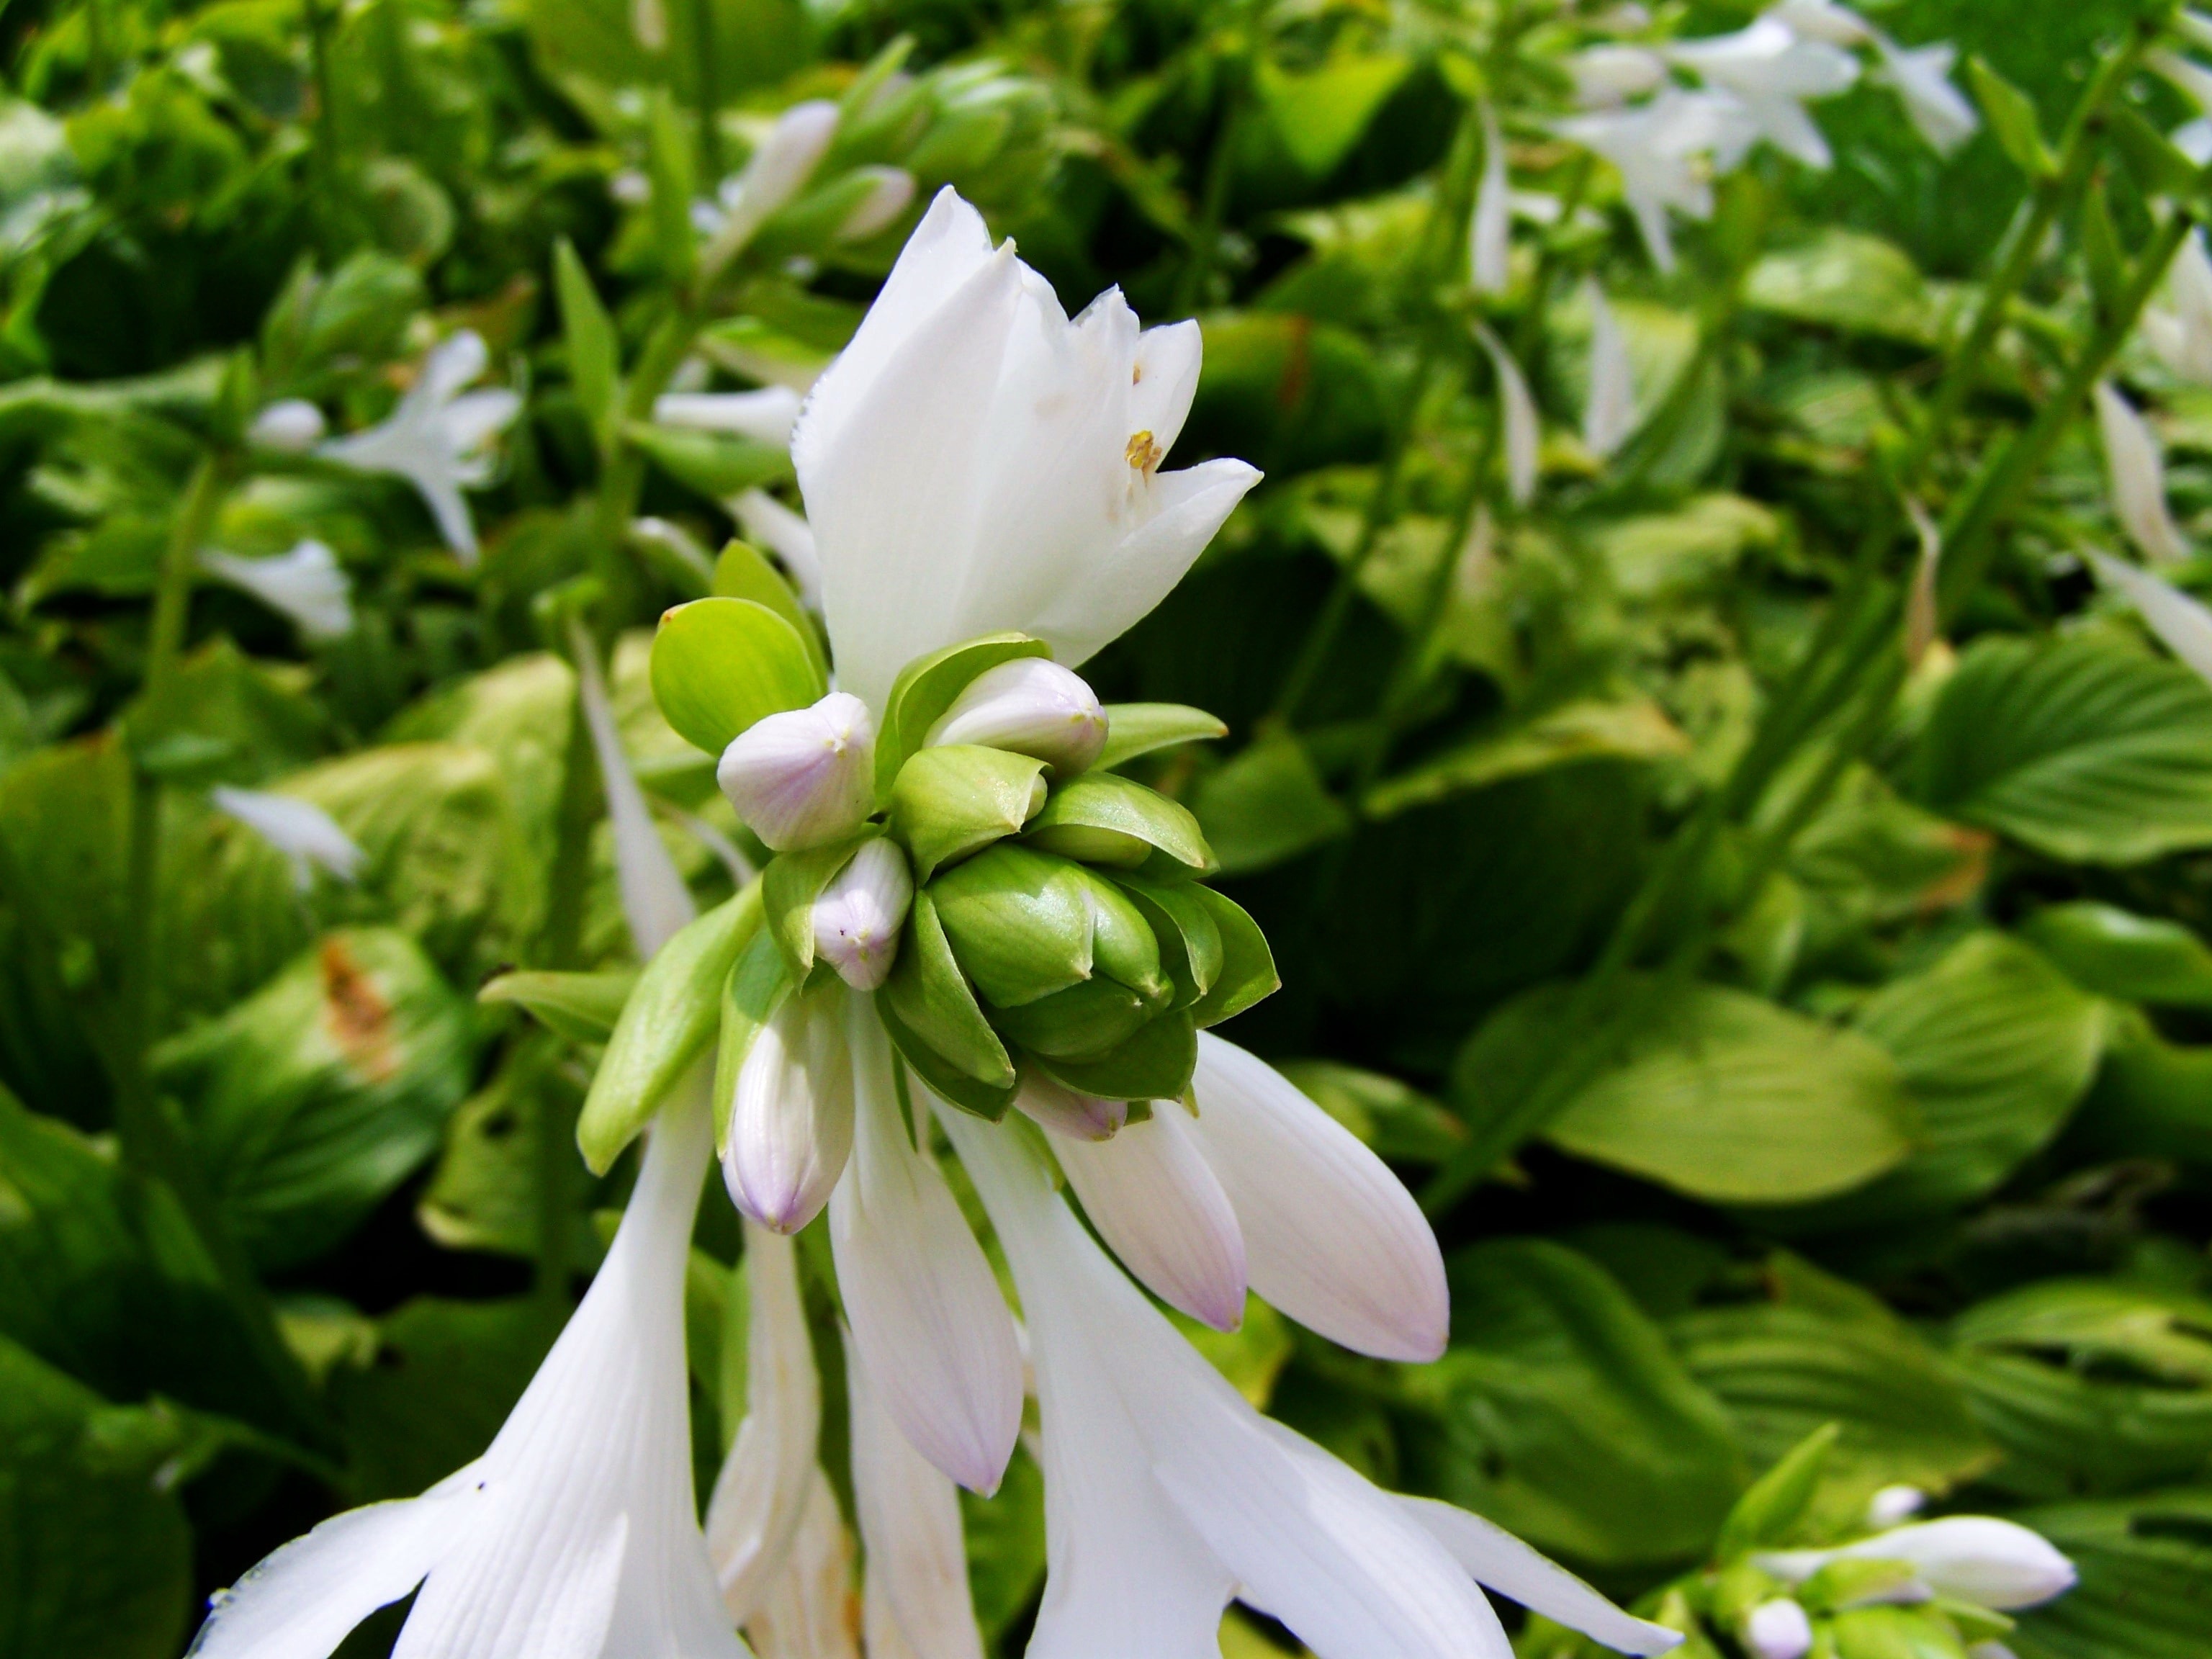 white and green petaled flower close up shot